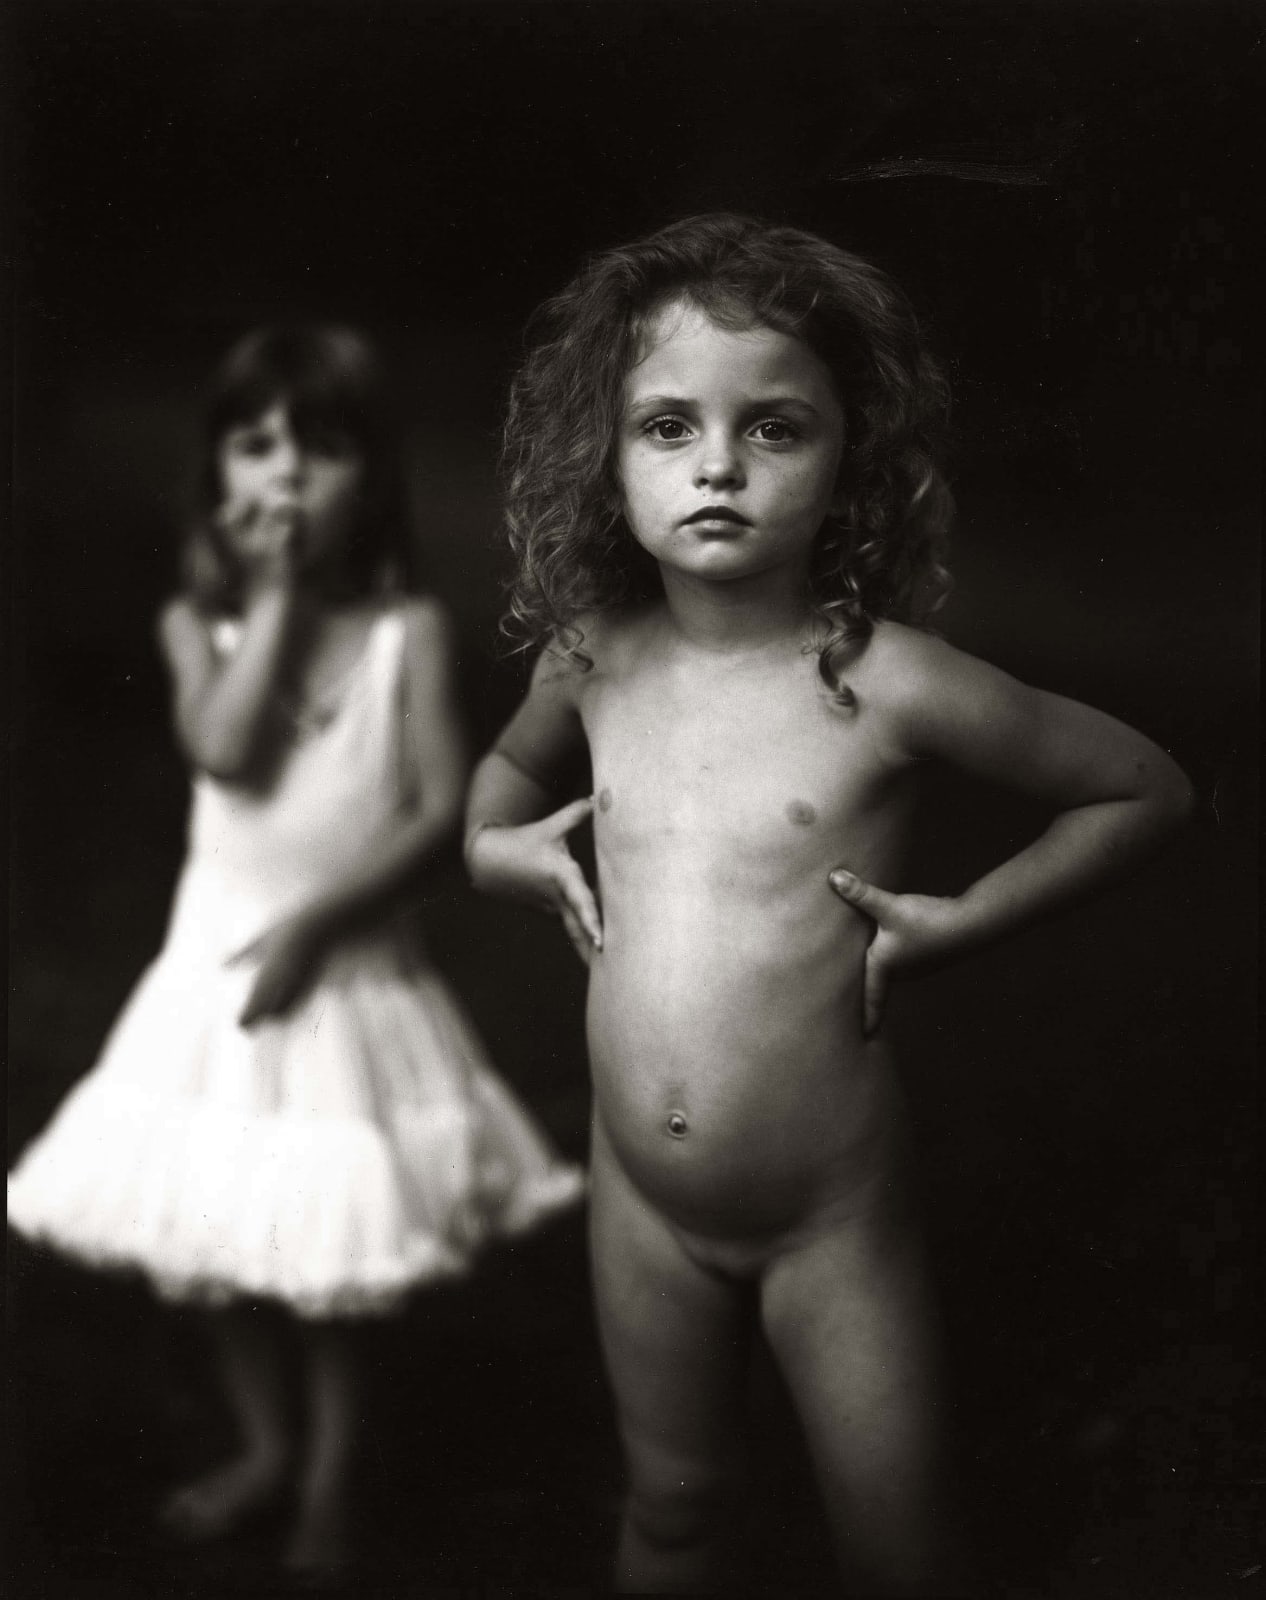 Virginia at four with hands on waist from the Immediate Family series by Sally Mann